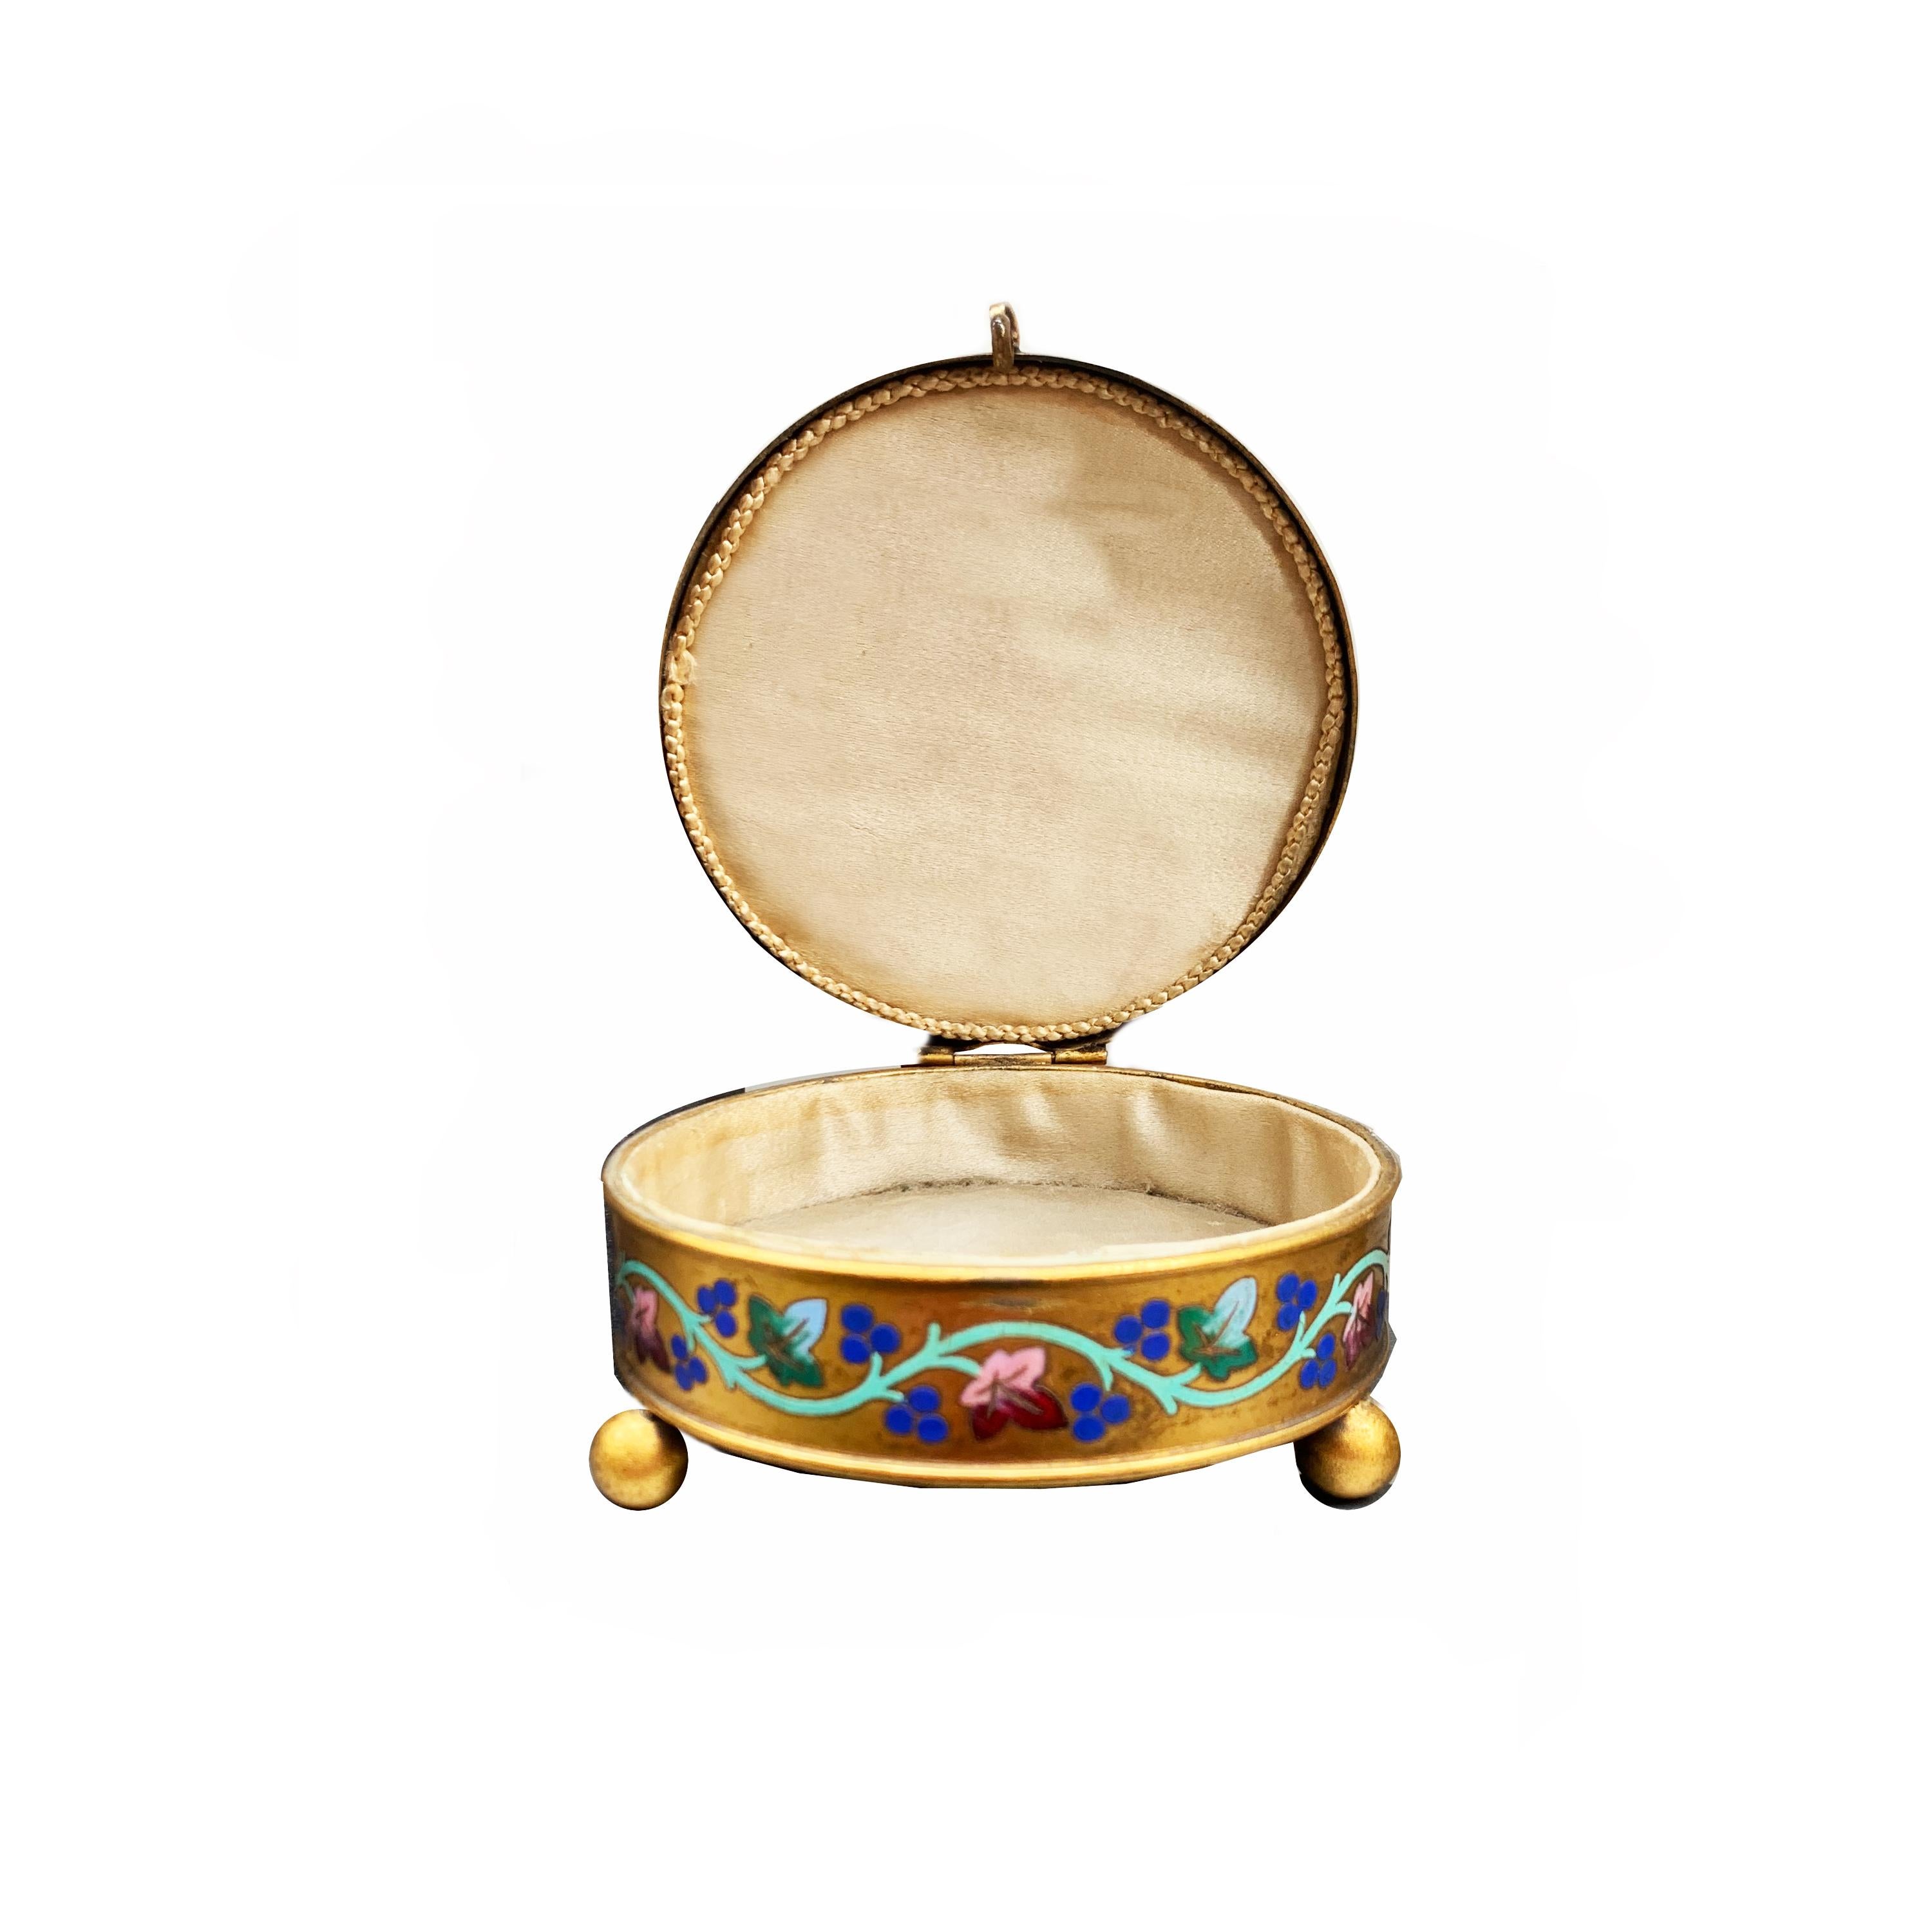 In this 24 kt gilded bronze box with  hand-painted floral motifs  is set a beautiful micromosaic (circa 1850) depicting St. Peter's Basilica.
The 